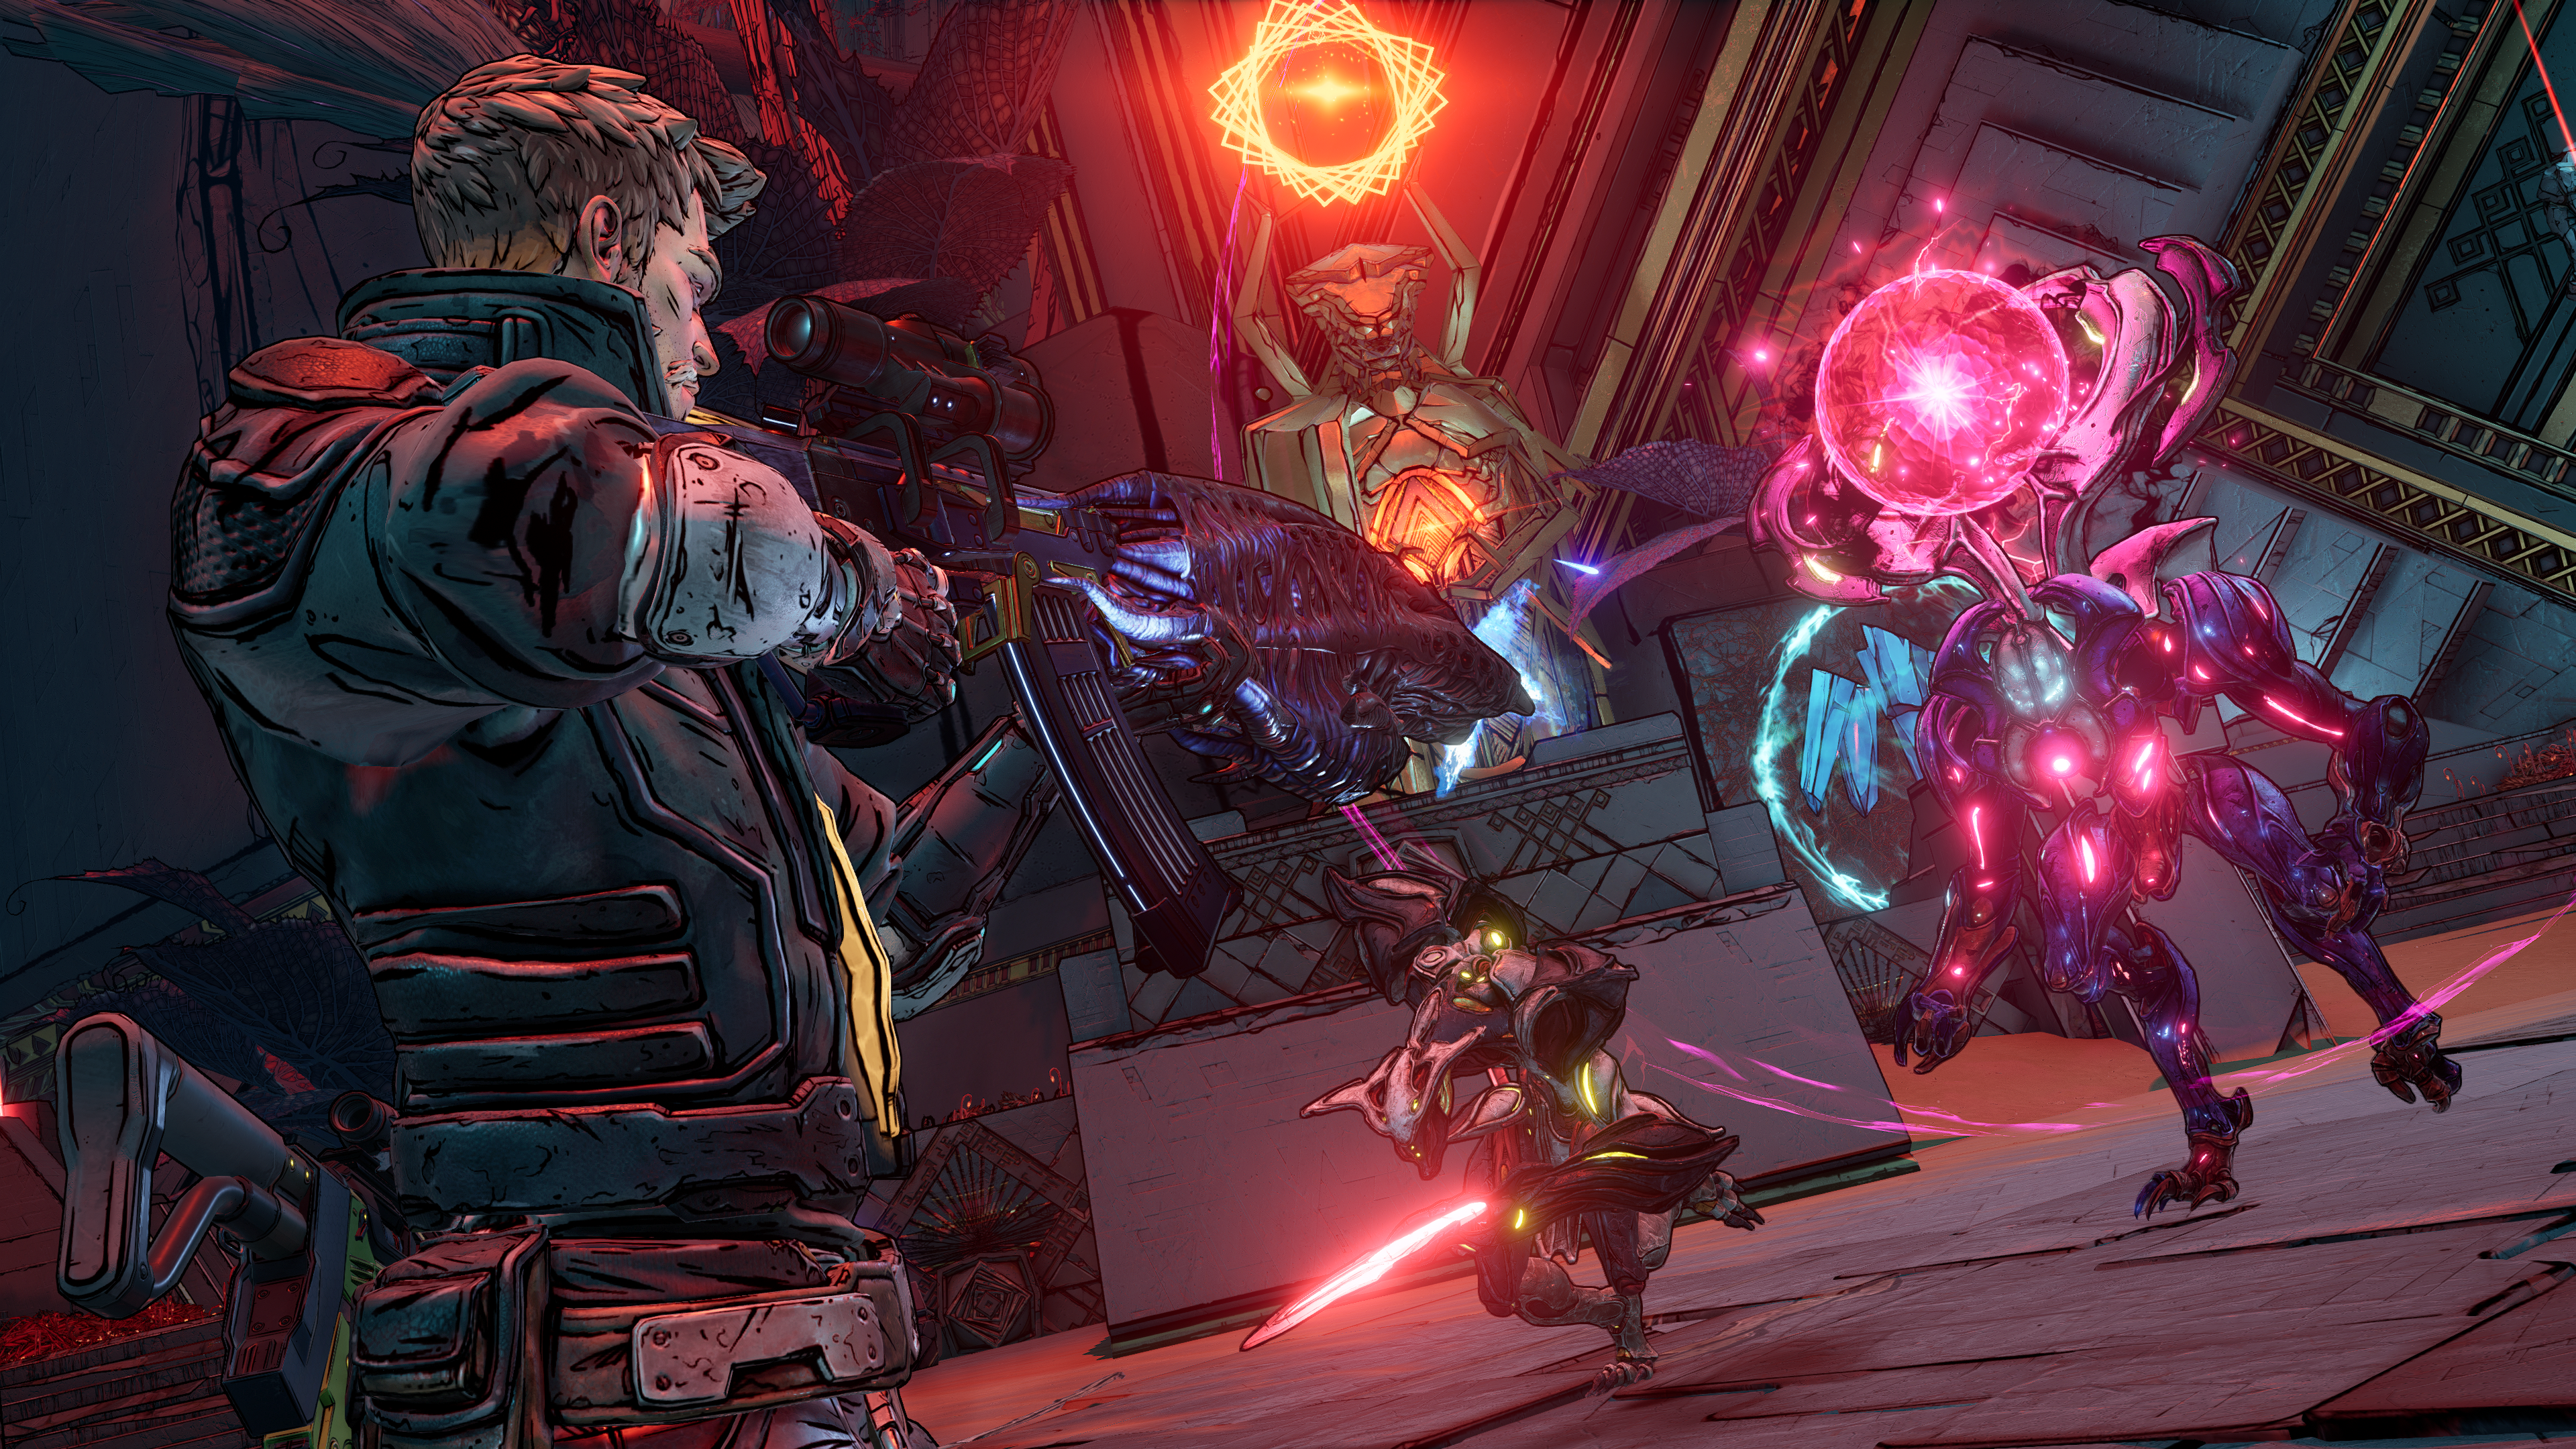 Zane shooting an enemy in Borderlands 3 Takedown at the Guardian Breach - Getting new skill trees